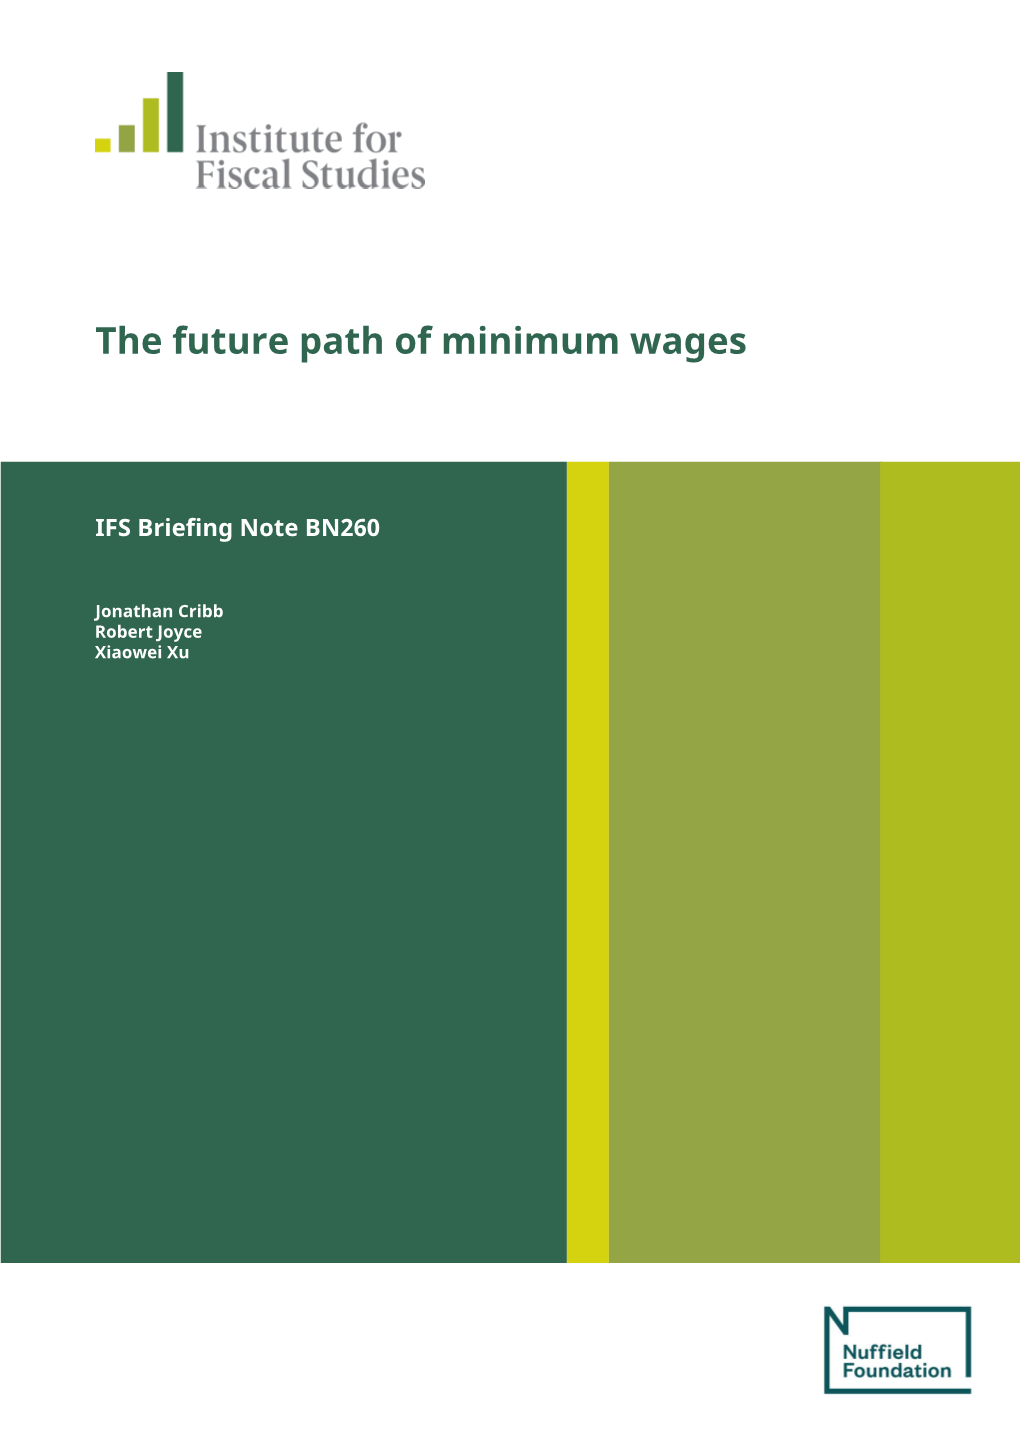 The Future Path of Minimum Wages